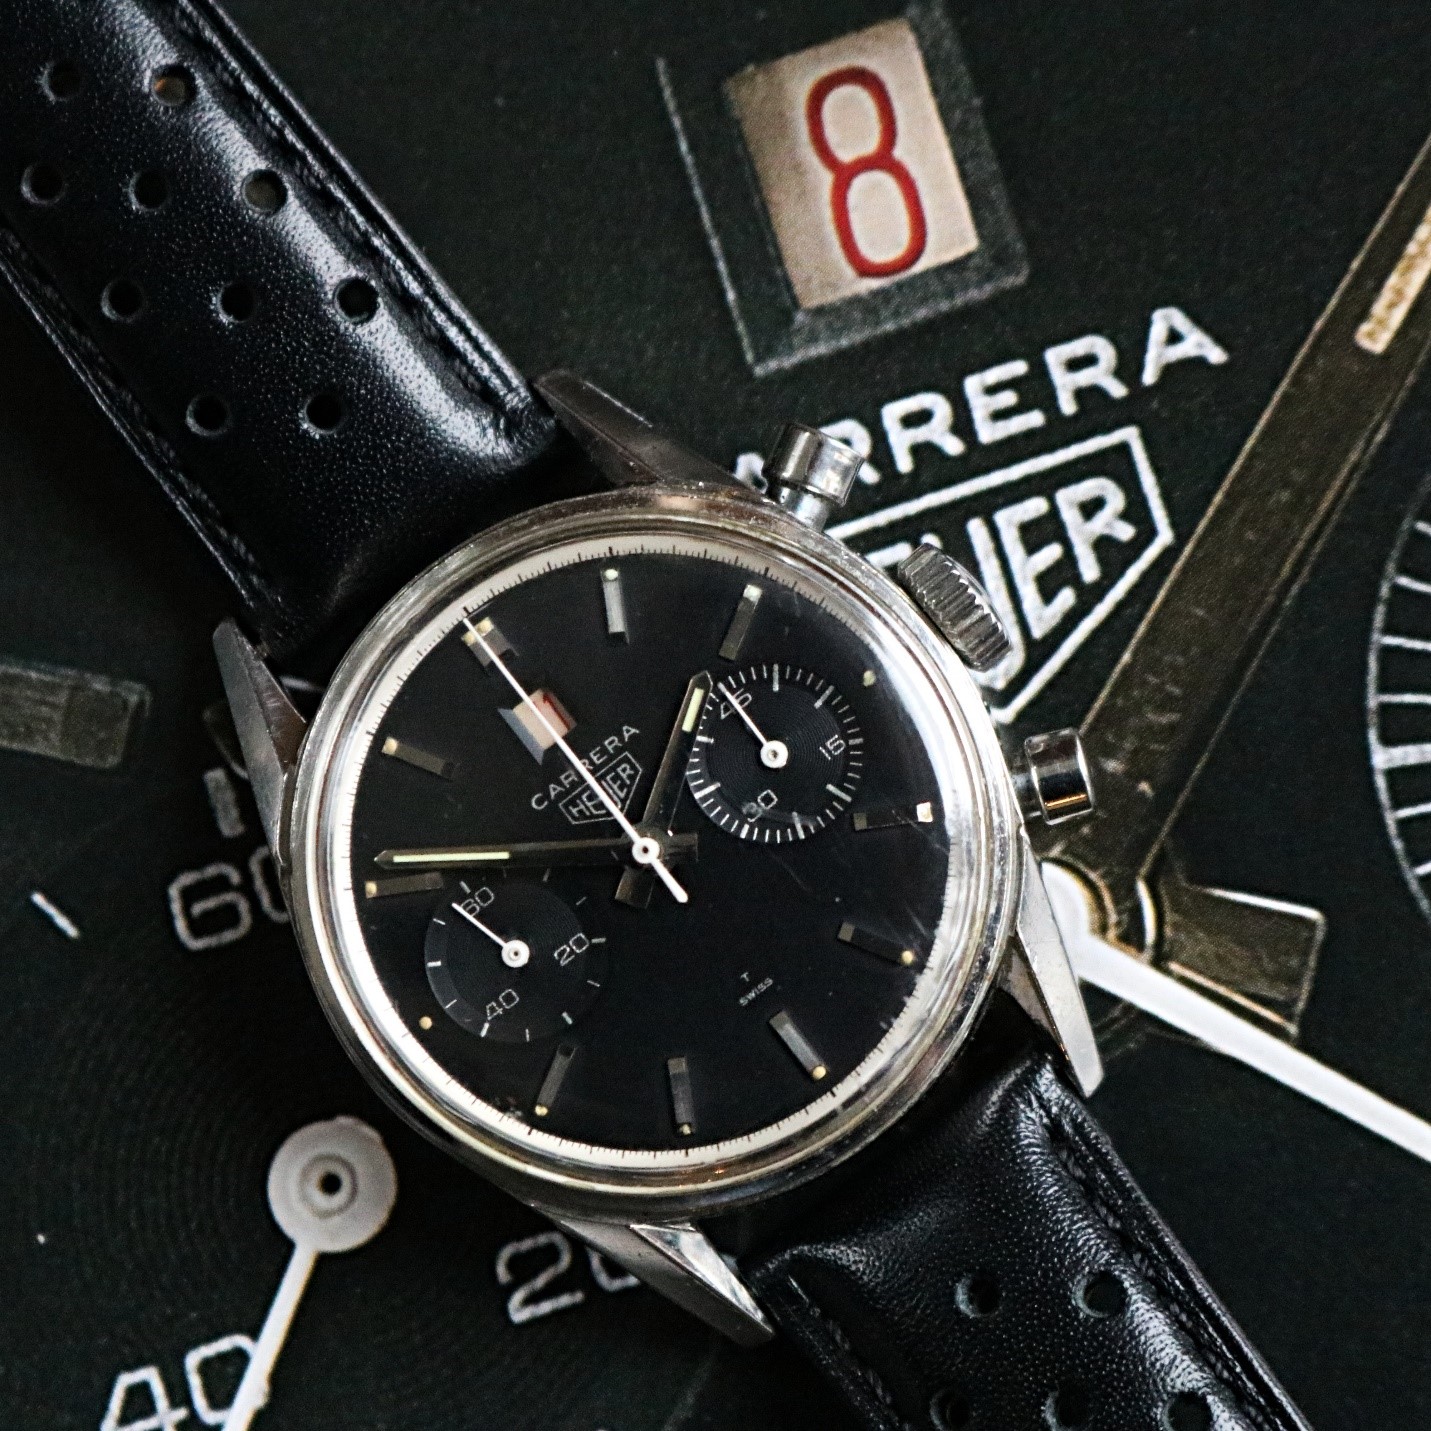 IN PICTURES: A Brief History Of The TAG Heuer Carrera